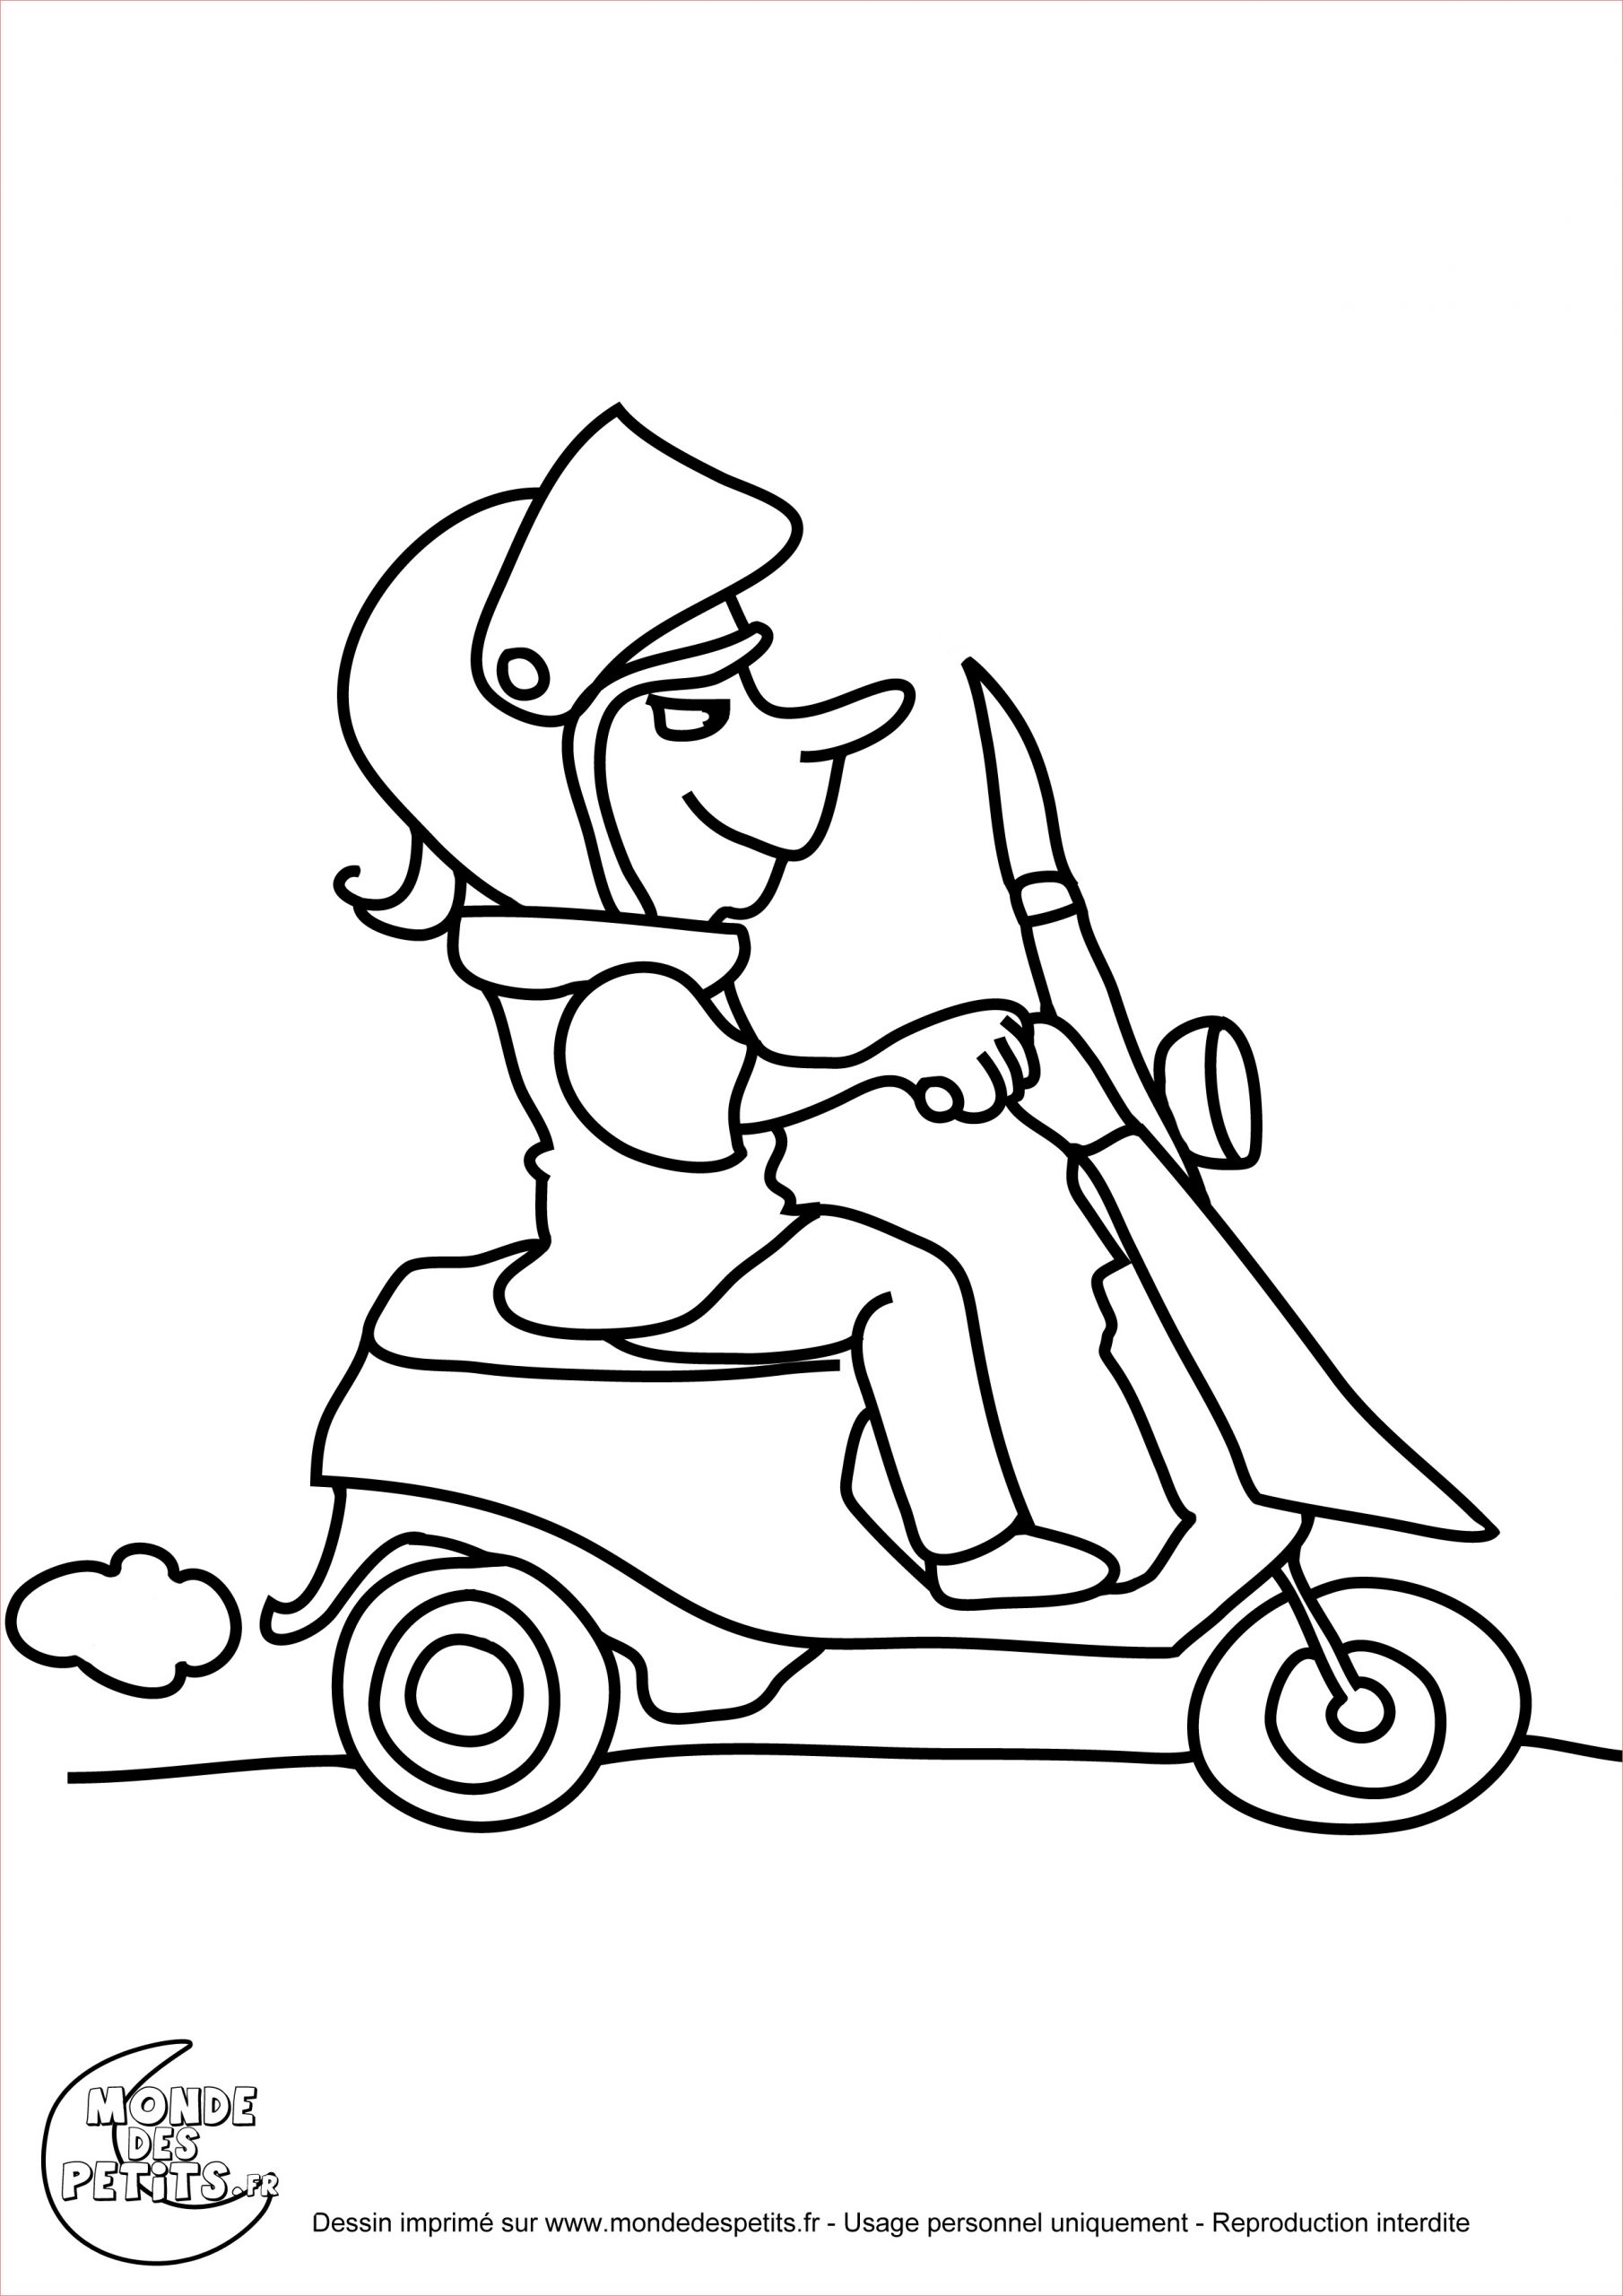 Coloriage Scooter Luxe 15 Coloriage Scooter Des Mers